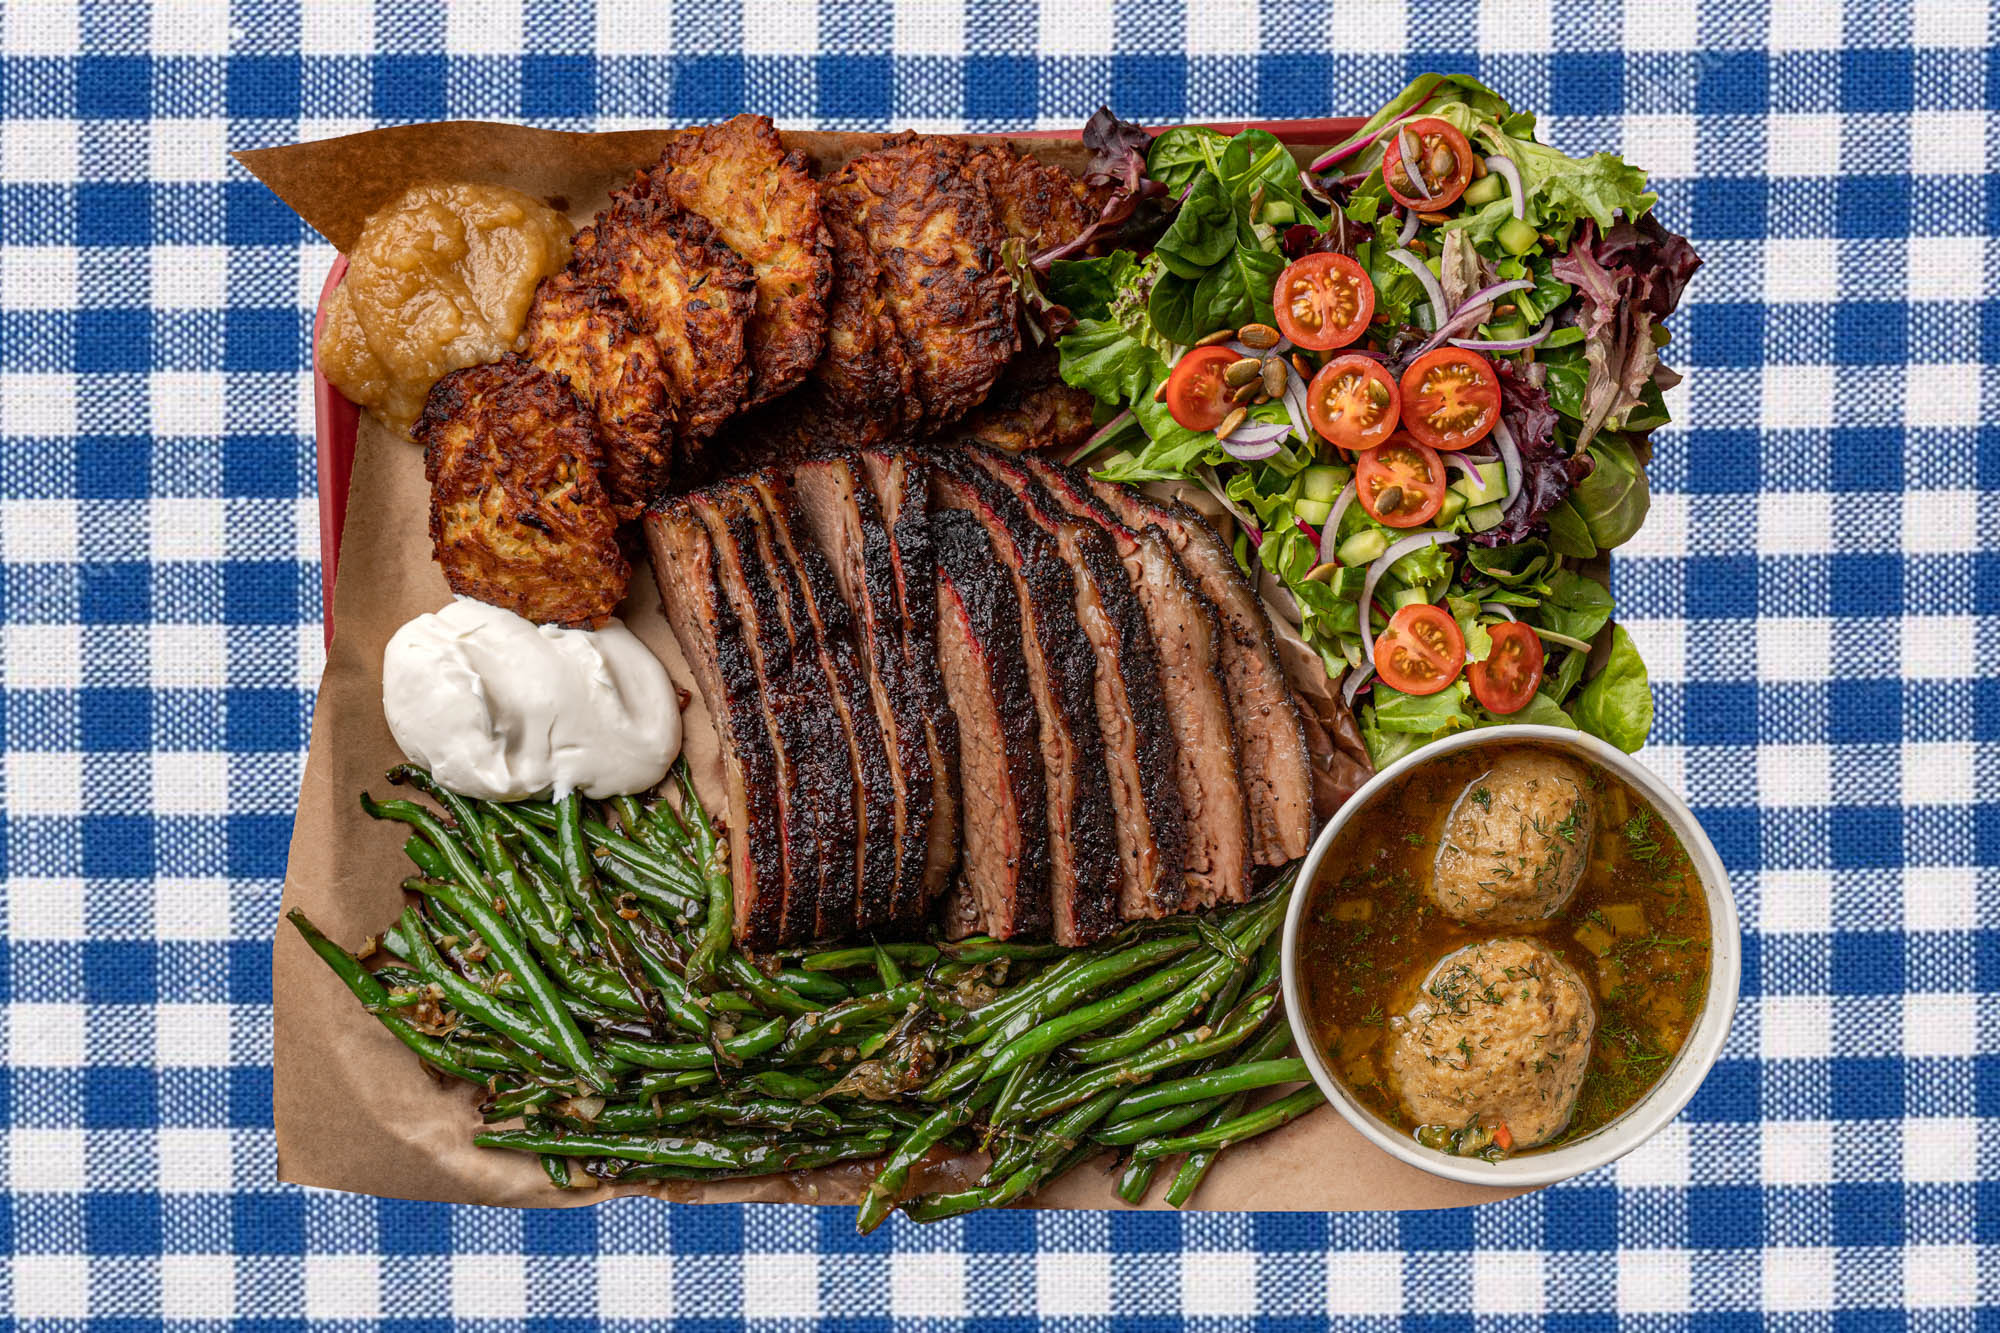 A blue-and-white gingham tablecloth placed underneath a heaping barbecue tray: on top of the tray, thickly sliced brisket, golden-fried latkes, sour cream, green salad, smothered green beans, and matzoh ball soup.